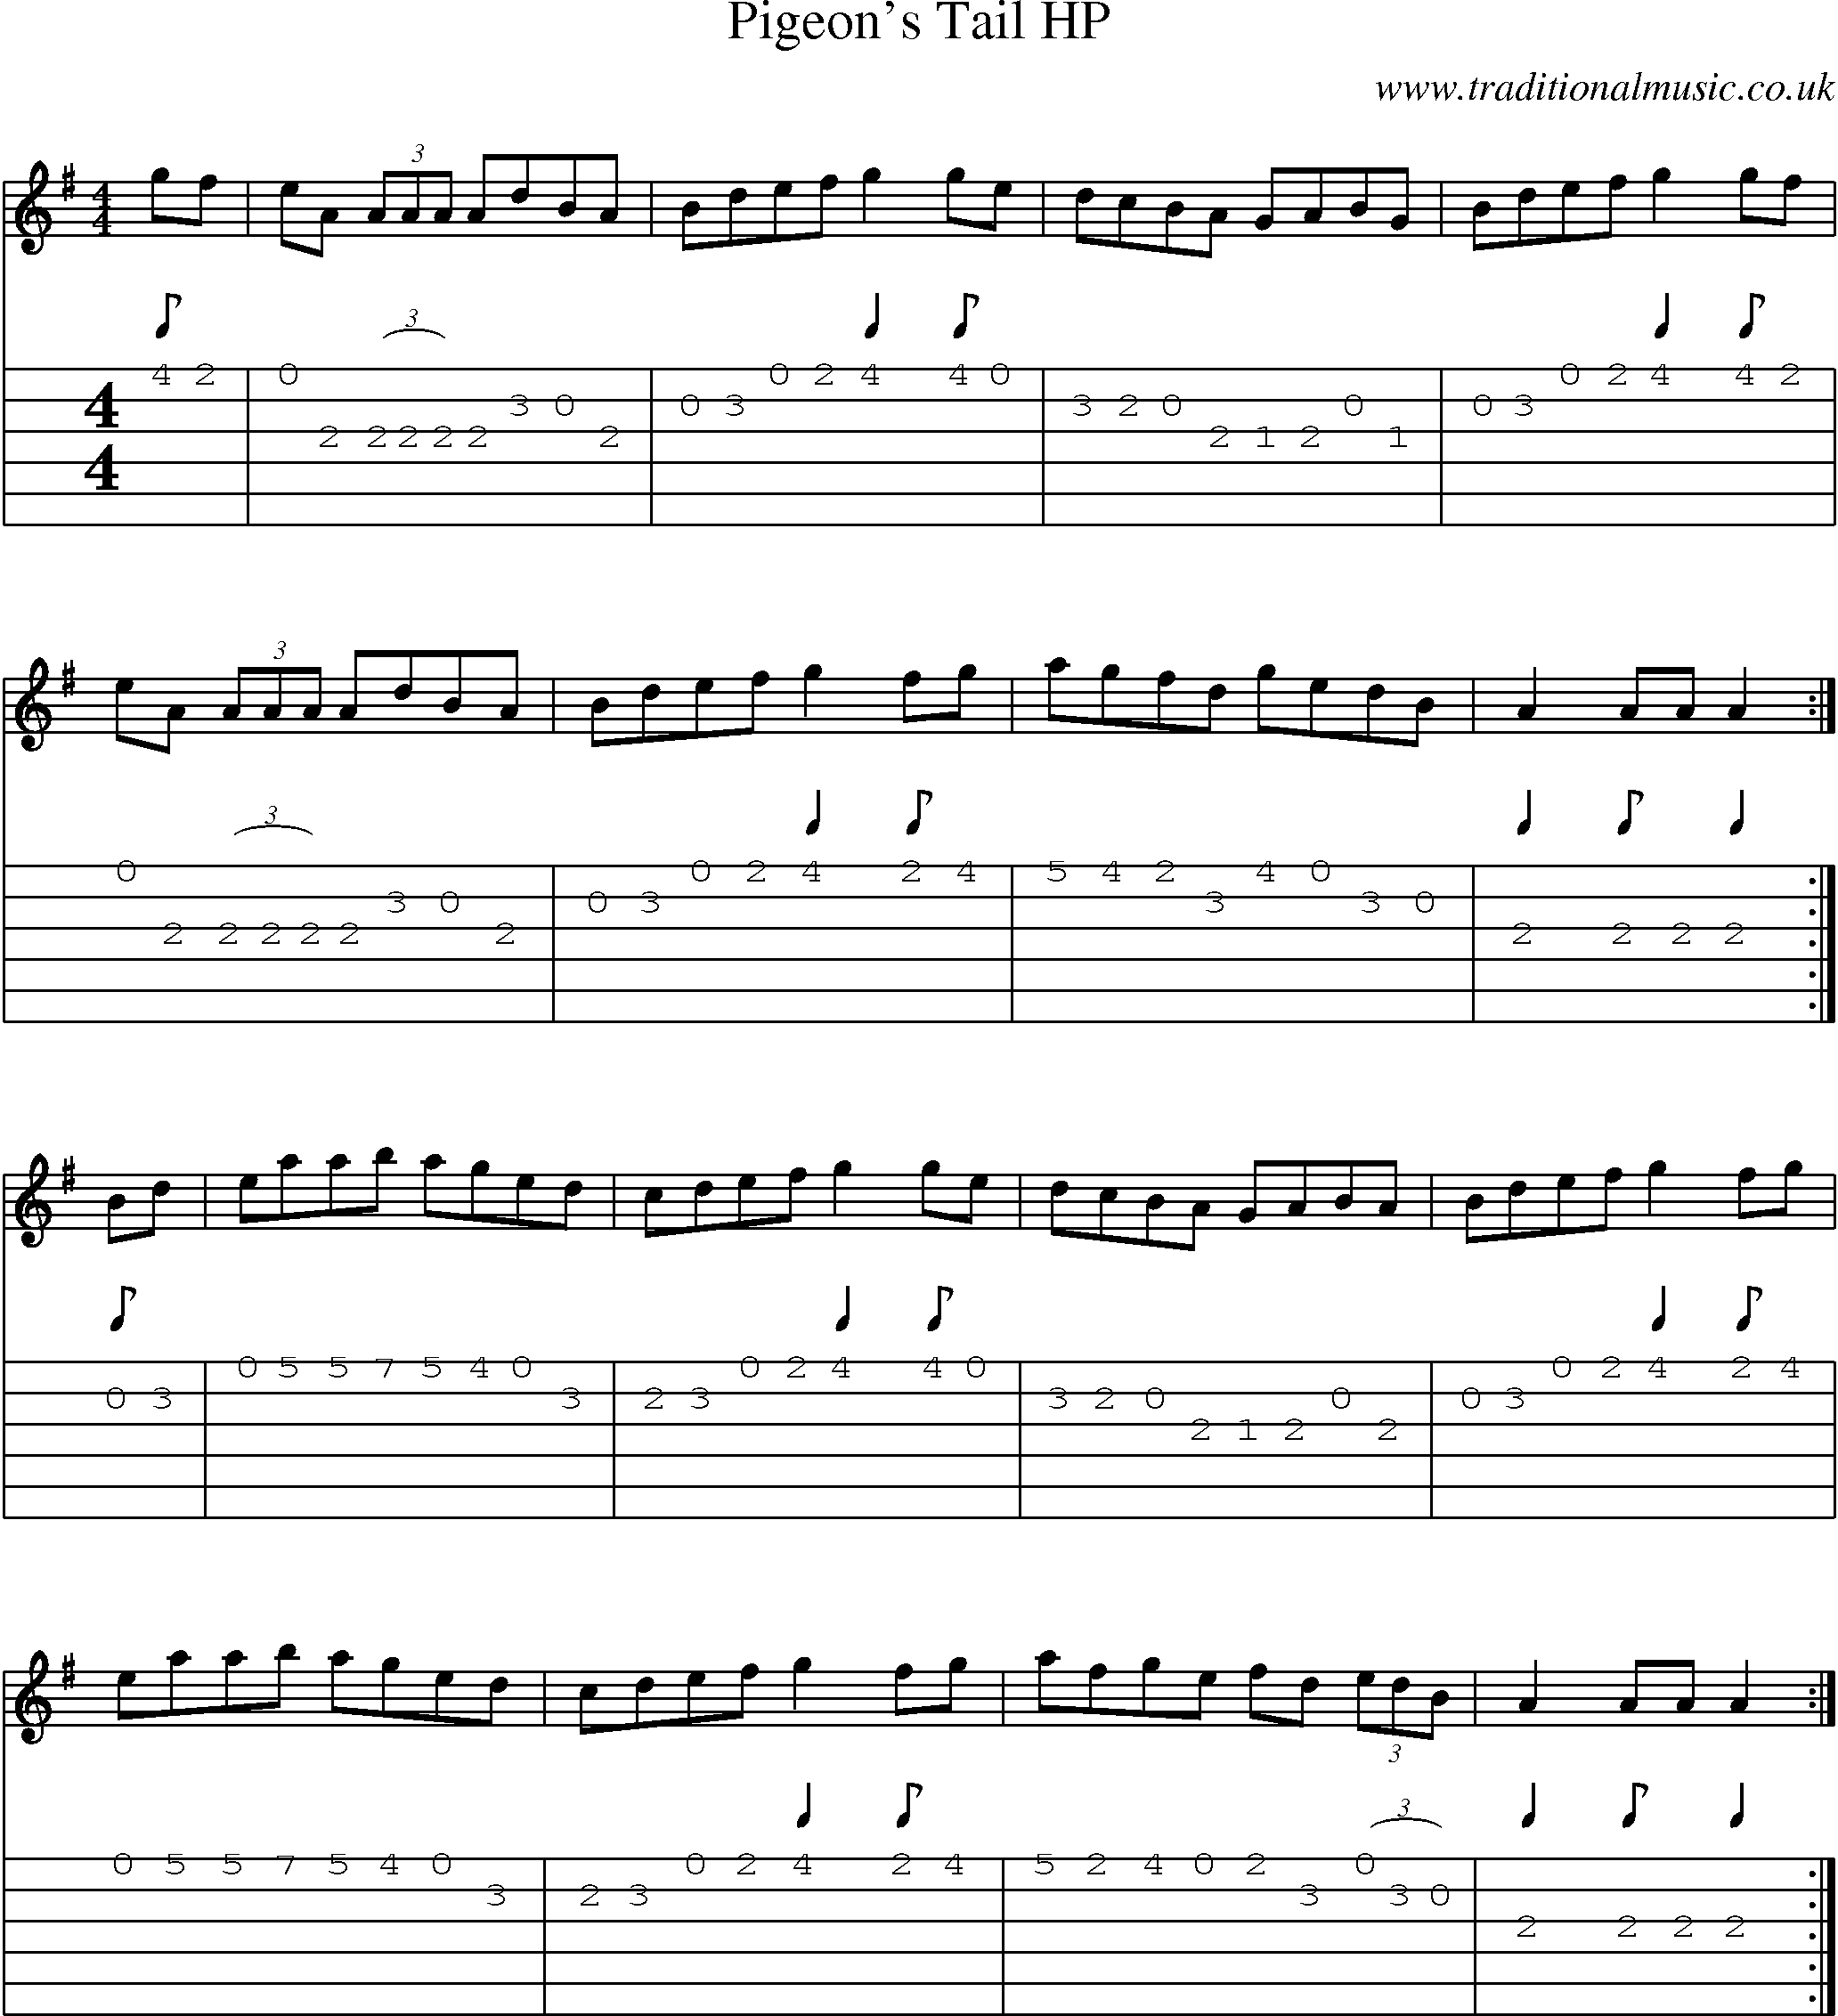 Music Score and Guitar Tabs for Pigeons Tail